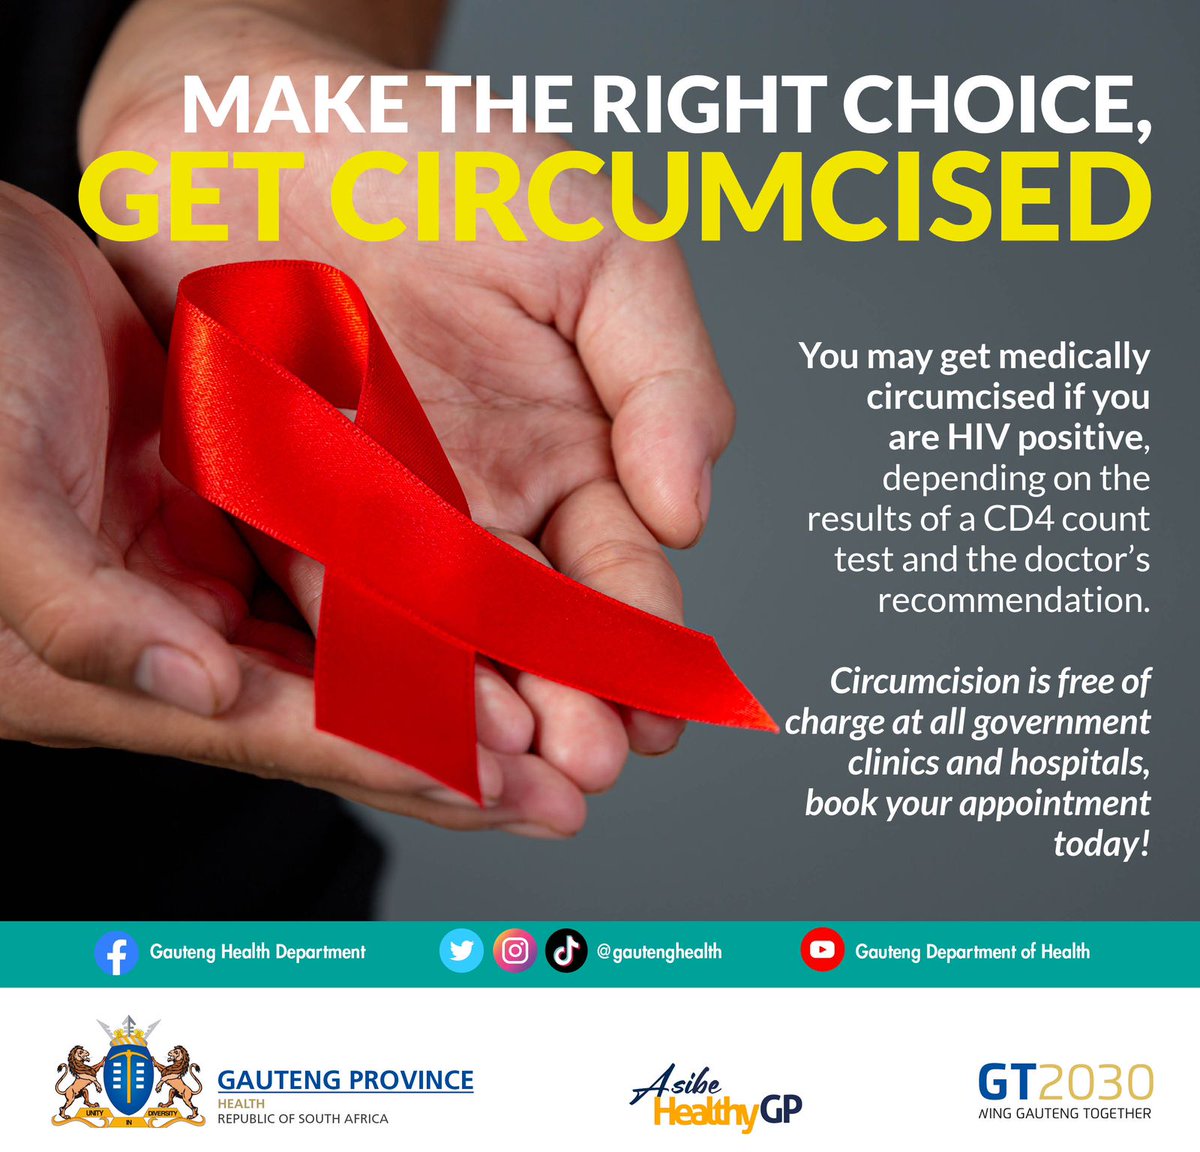 Circumcision reduces HIV infection by 60%. However, even if you’re positive, you can still get circumcised. You’ll be offered support, if you’re not on ARVs, you’ll be initiated and a future appointment will be made for you if you’re not eligible at the time. #MakeTheRightChoice